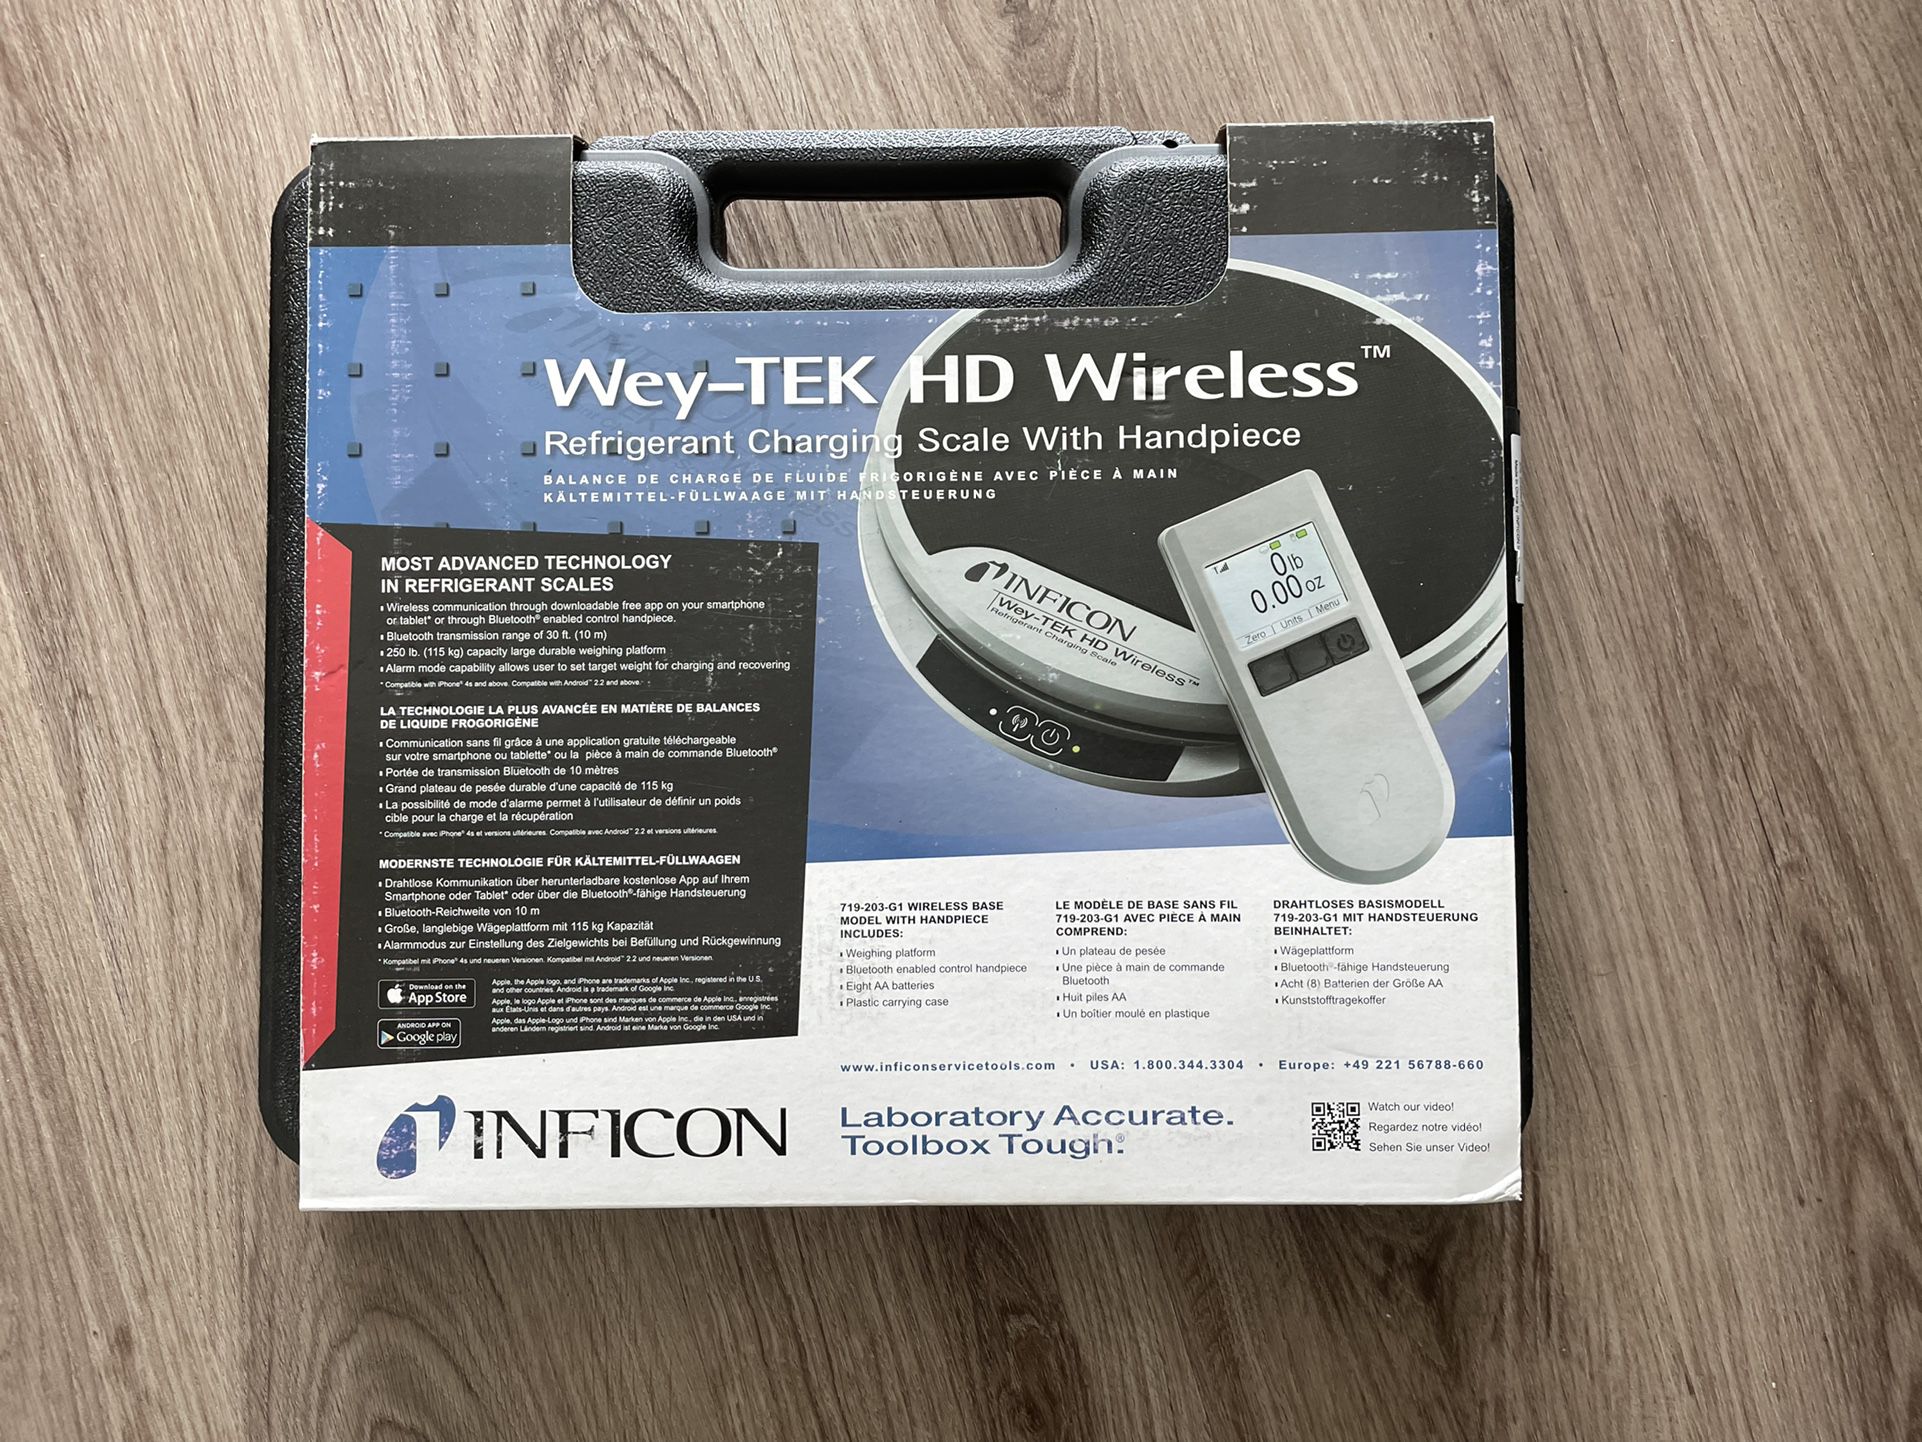 Inficon Wireless Refrigerant Charging Scale